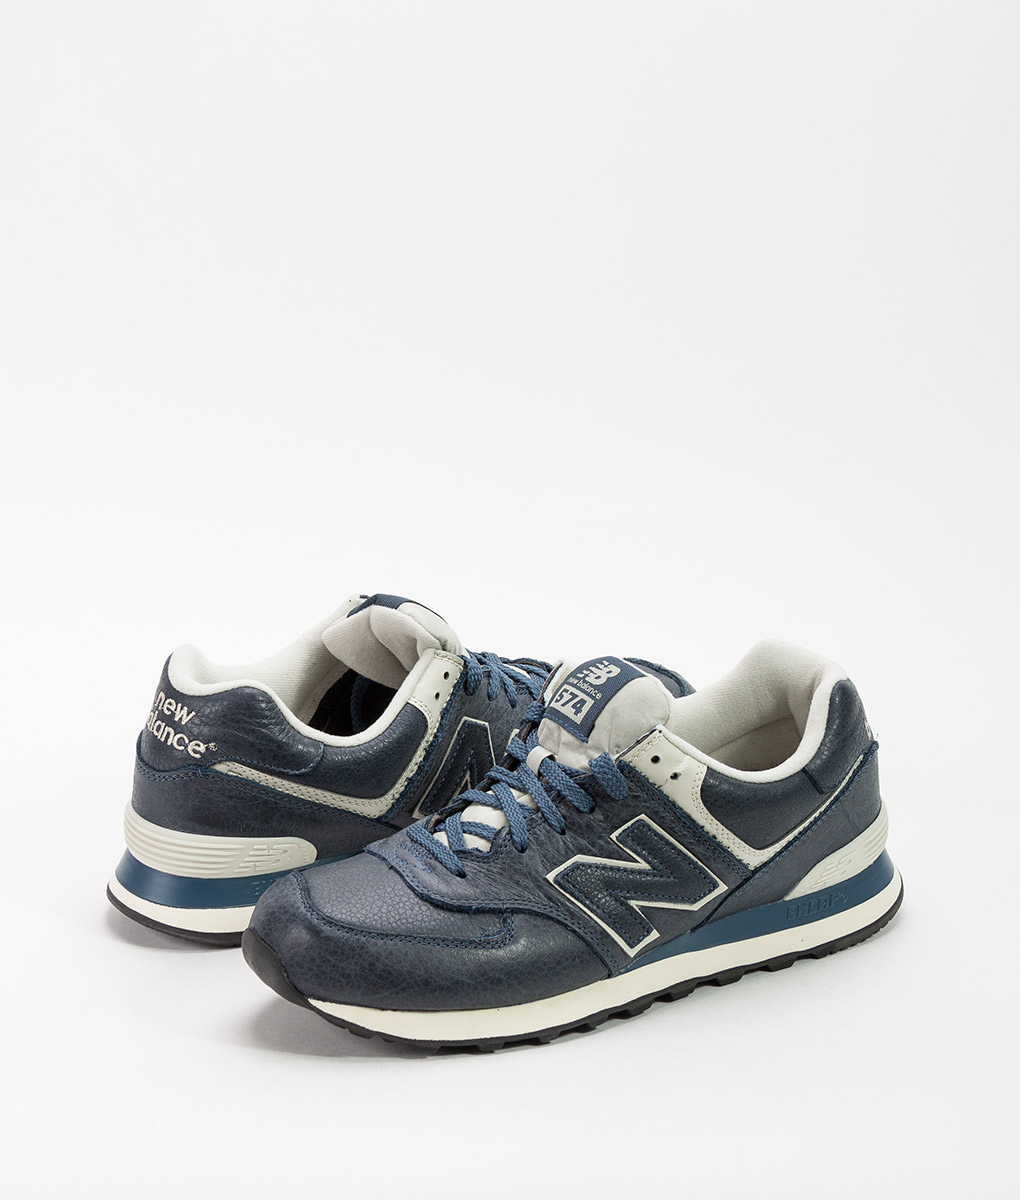 New Balance 99 Leather Online Sale, UP TO 56% OFF